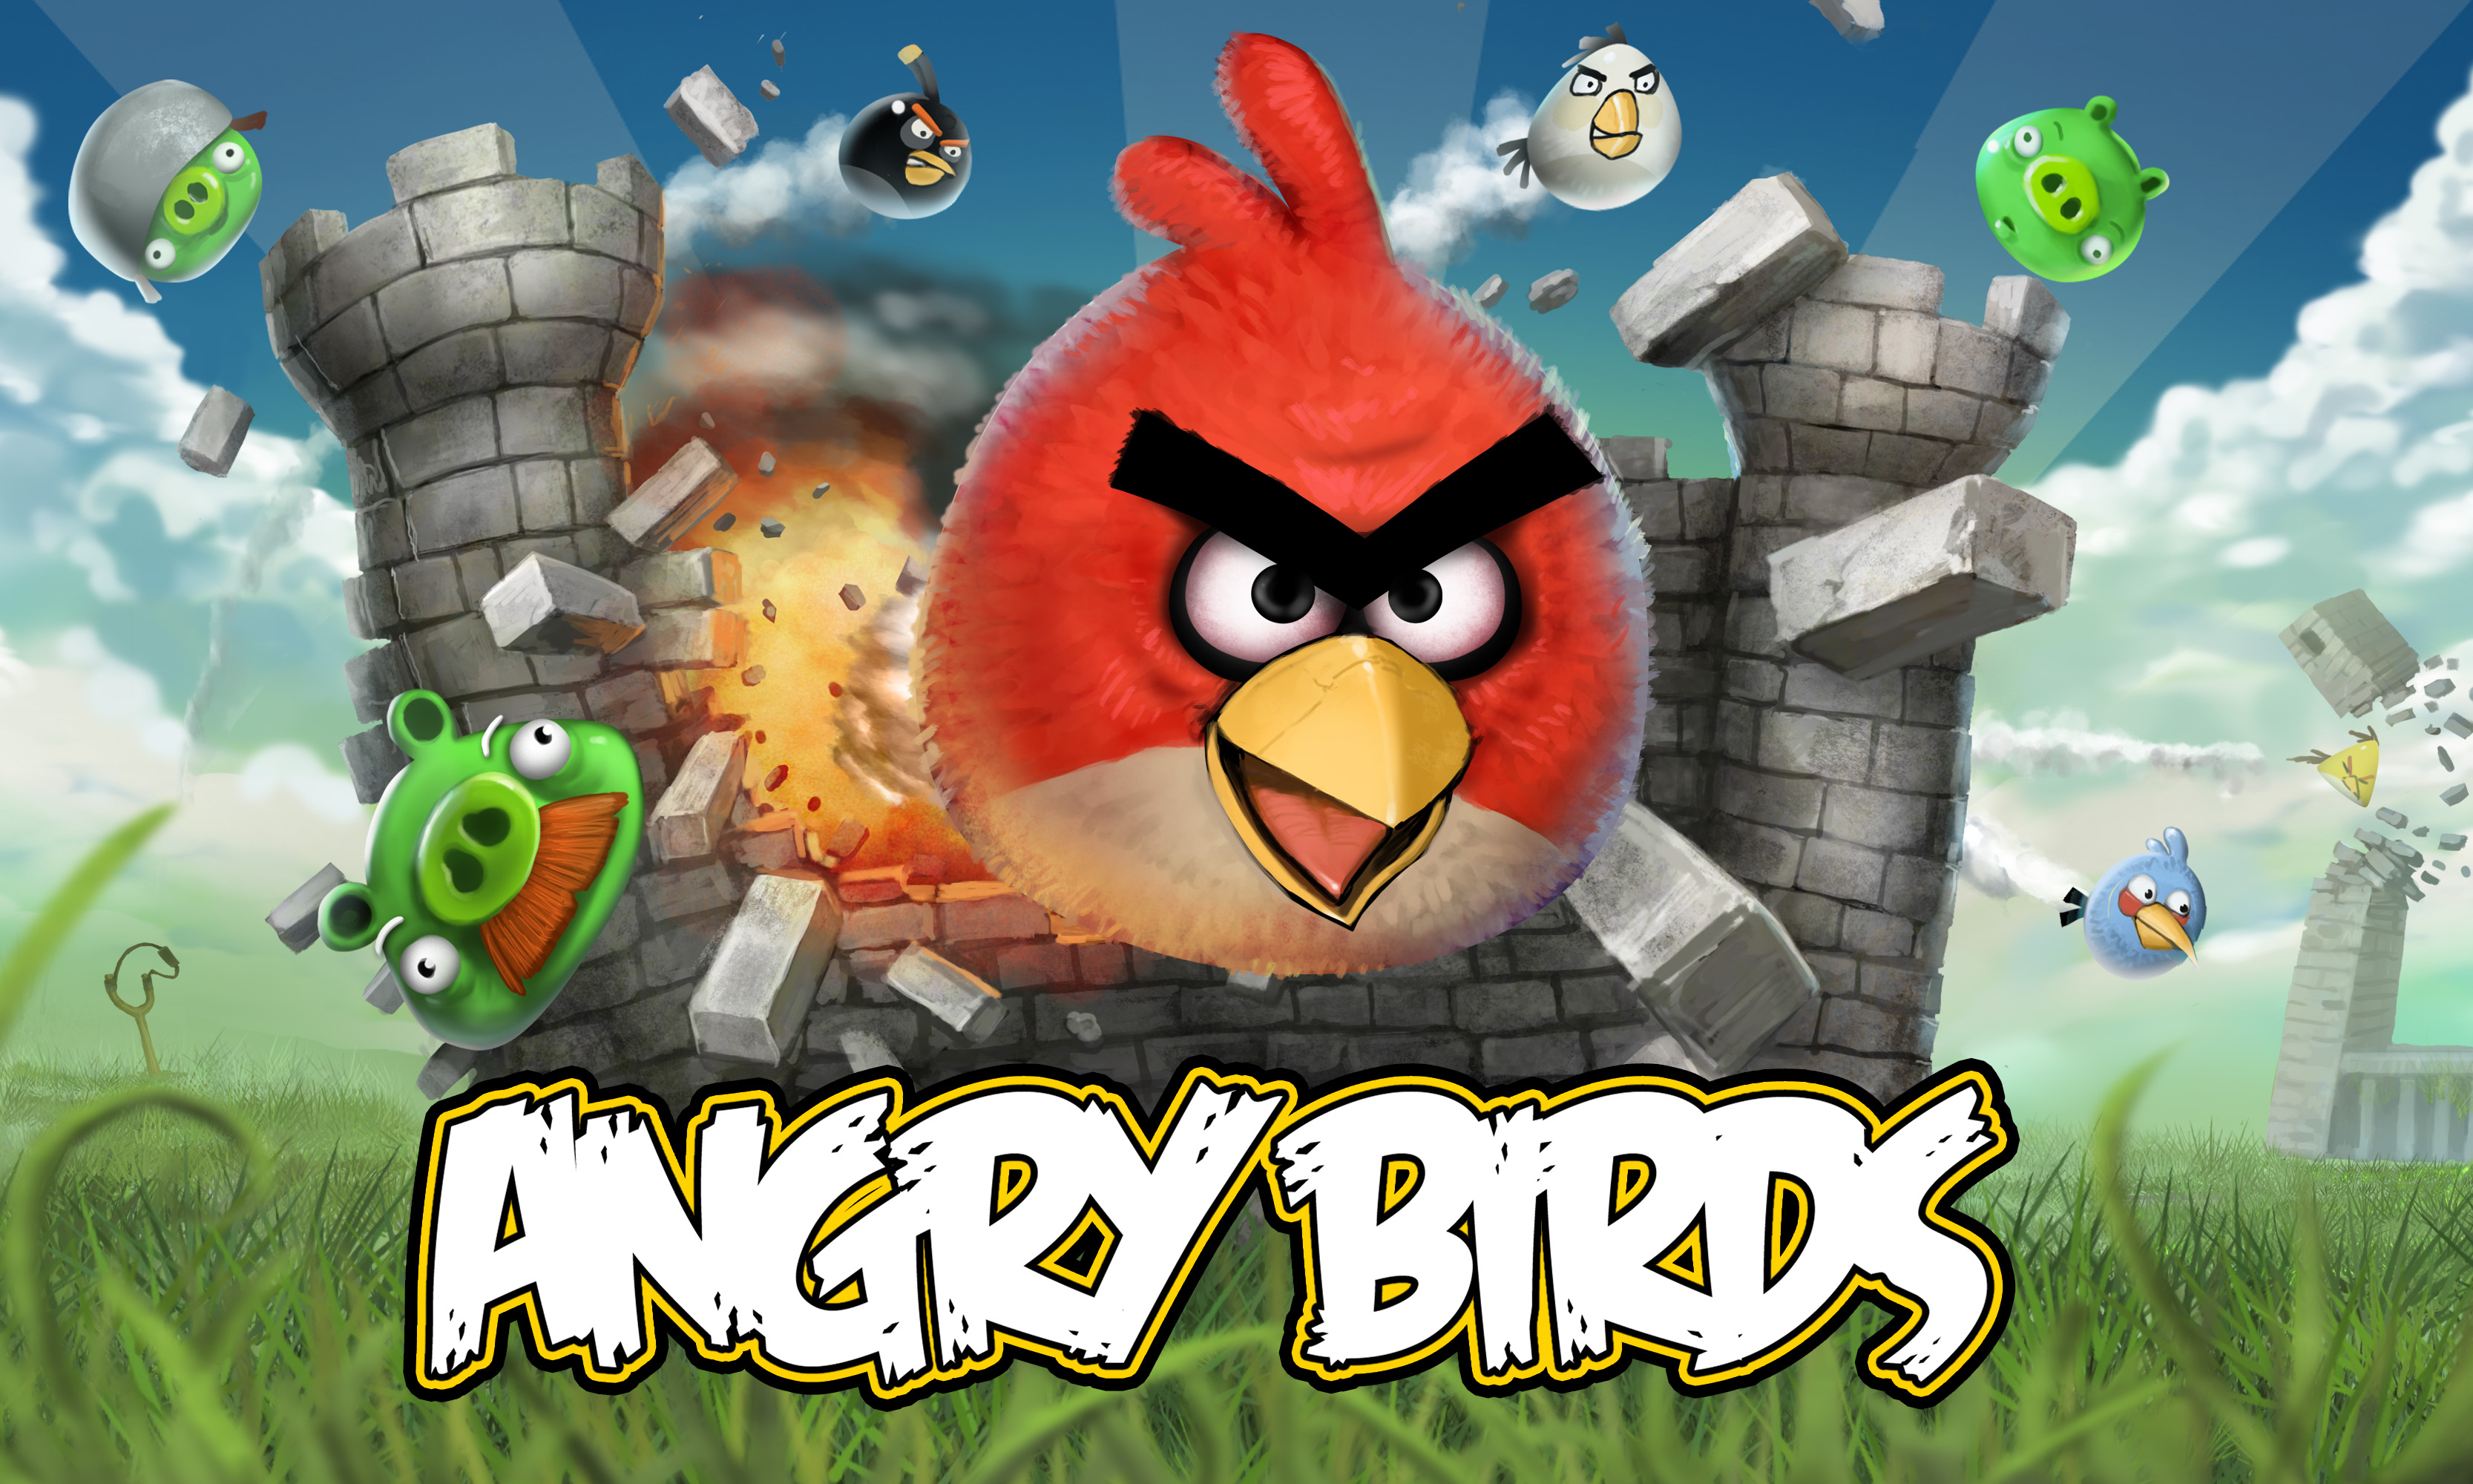 Angry Birds Wallpaper 8   PCTechNotes PC Tips Tricks and Tweaks